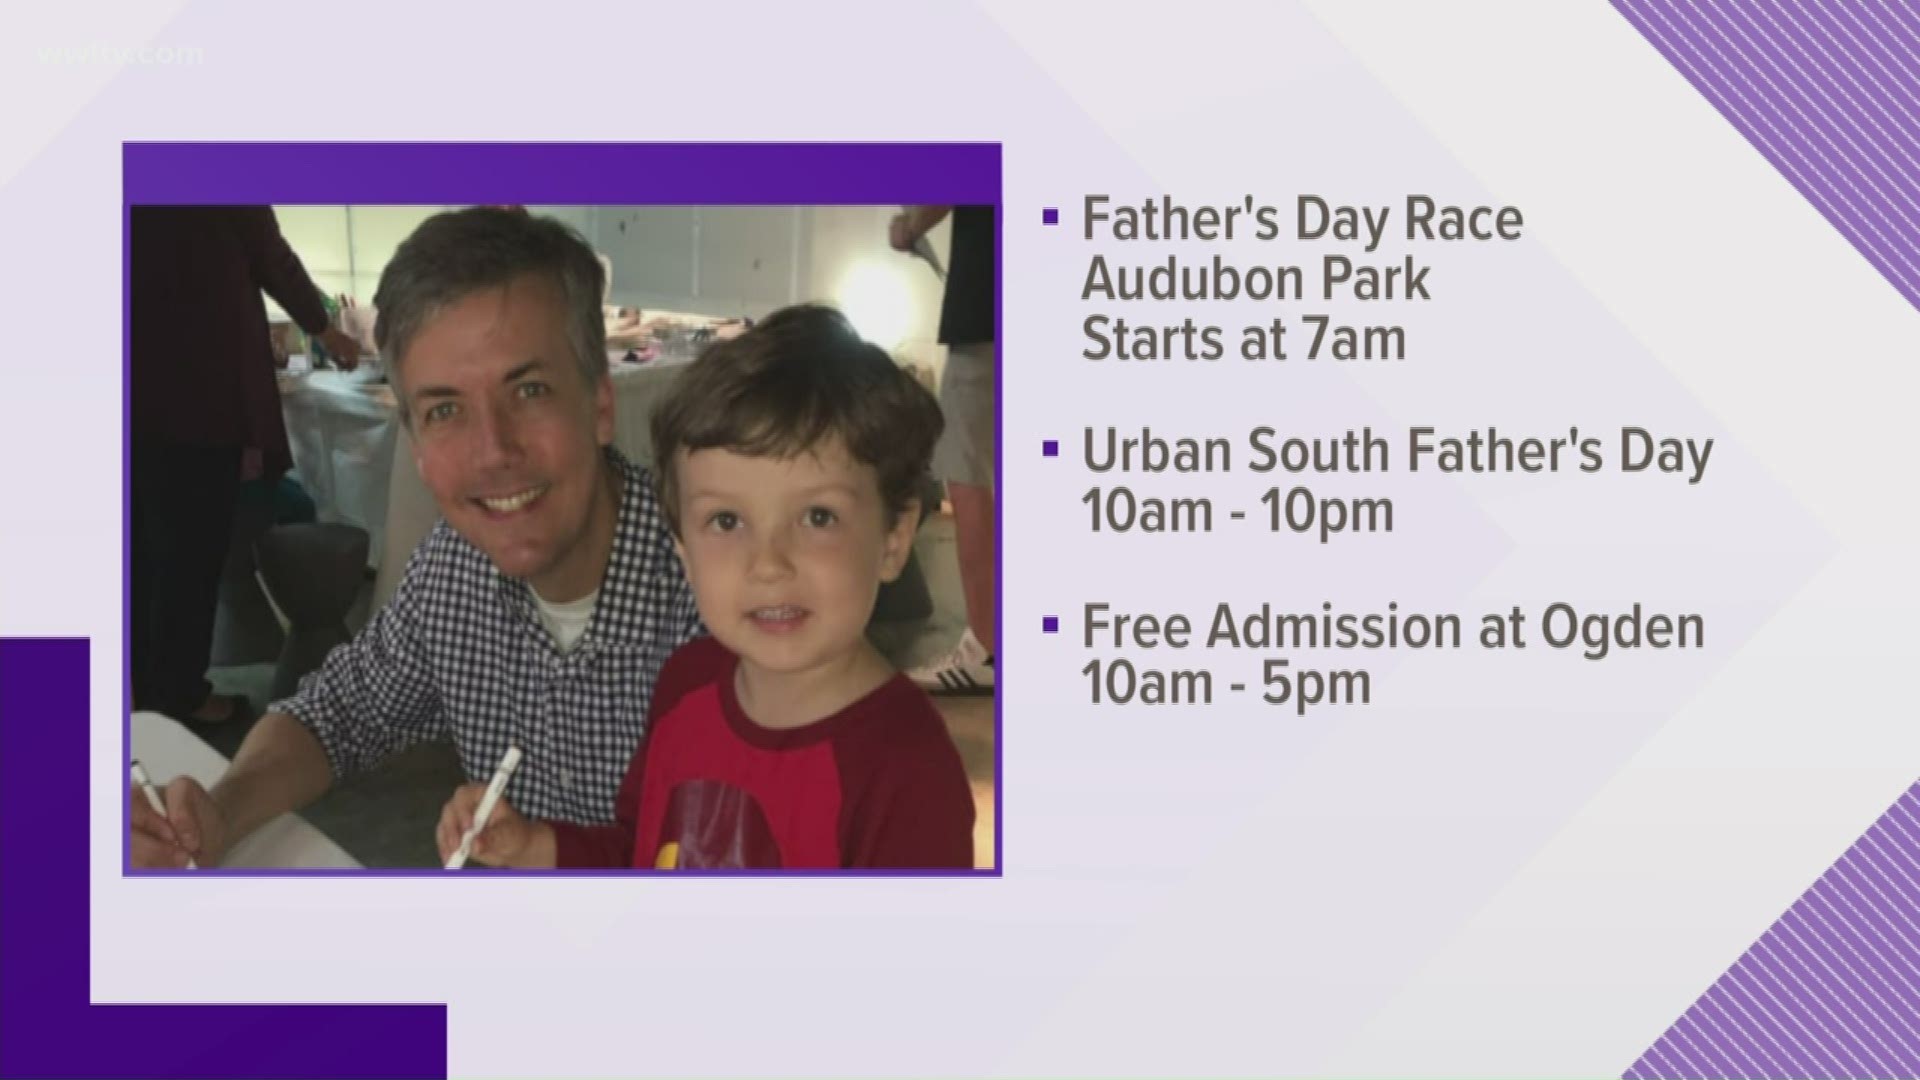 There's fun for everyone around the city this Father's Day Sunday!